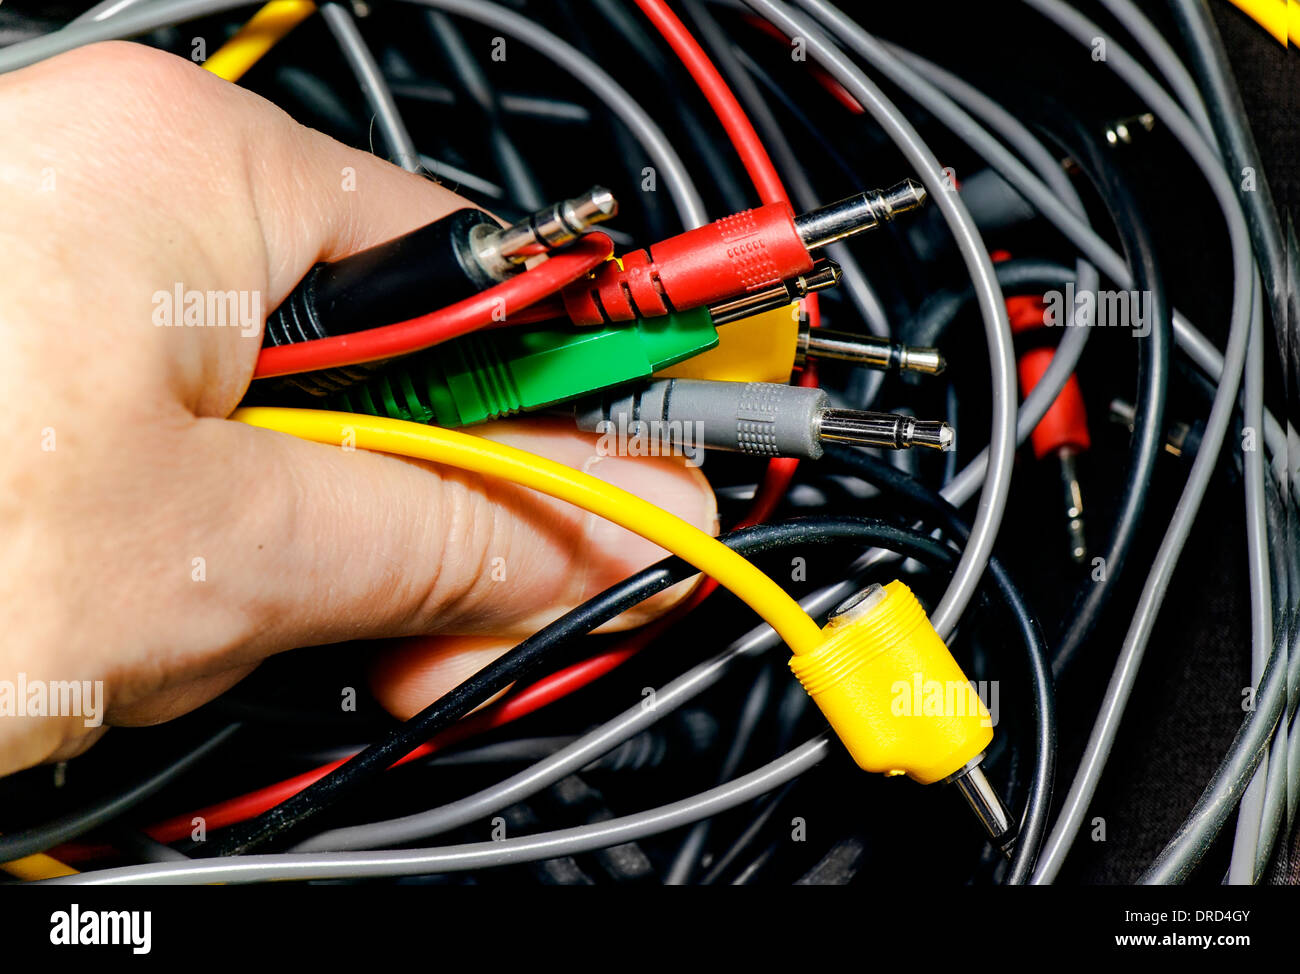 hand holding wires Stock Photo